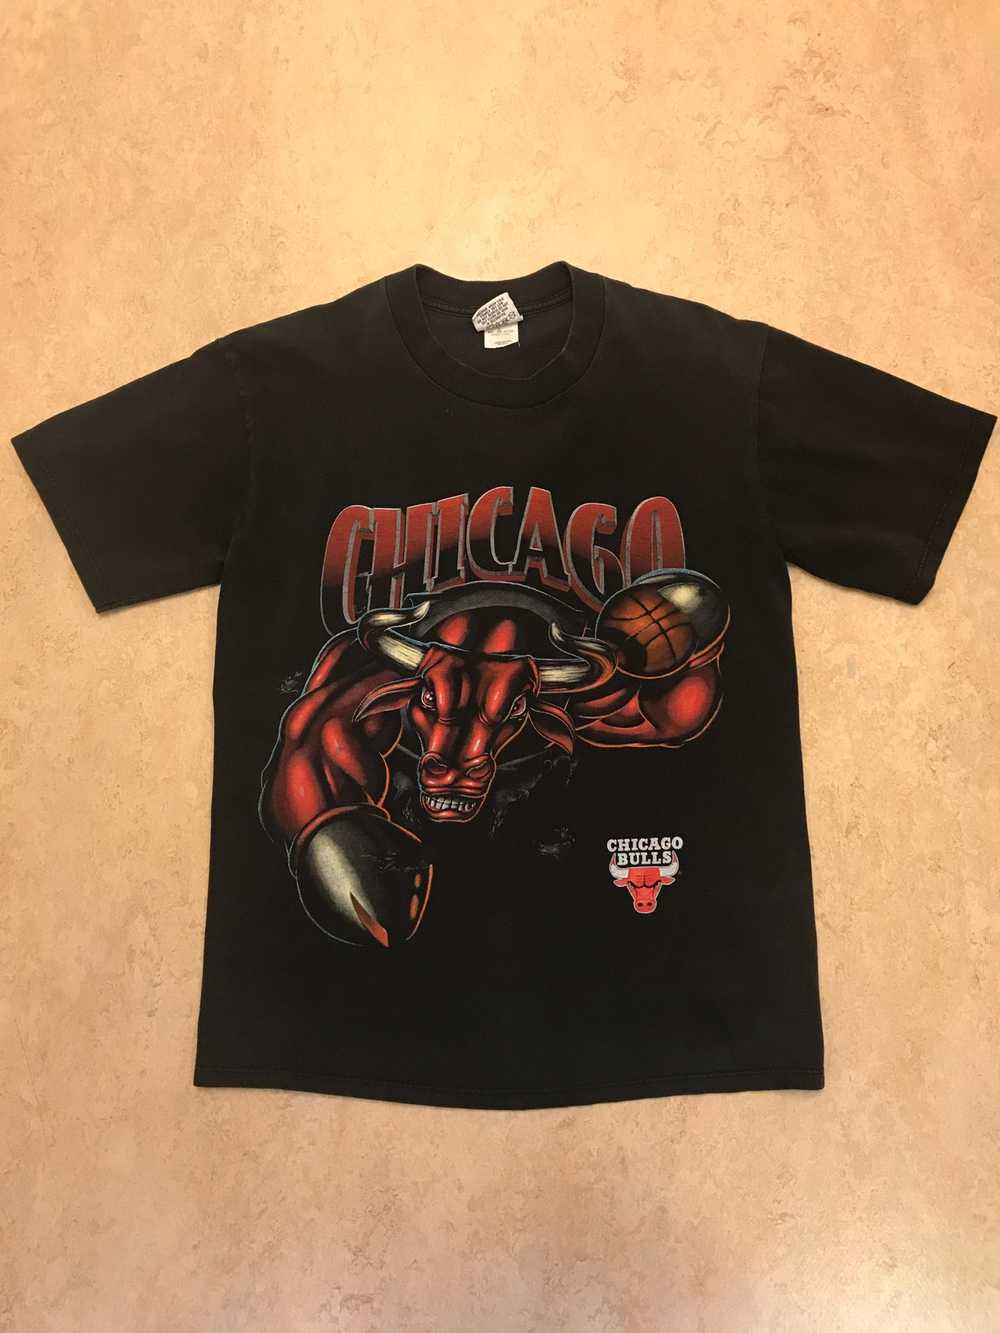 VTG 90's Chicago Bulls NBA warm up t shirt by Nutmeg Mills made in USA